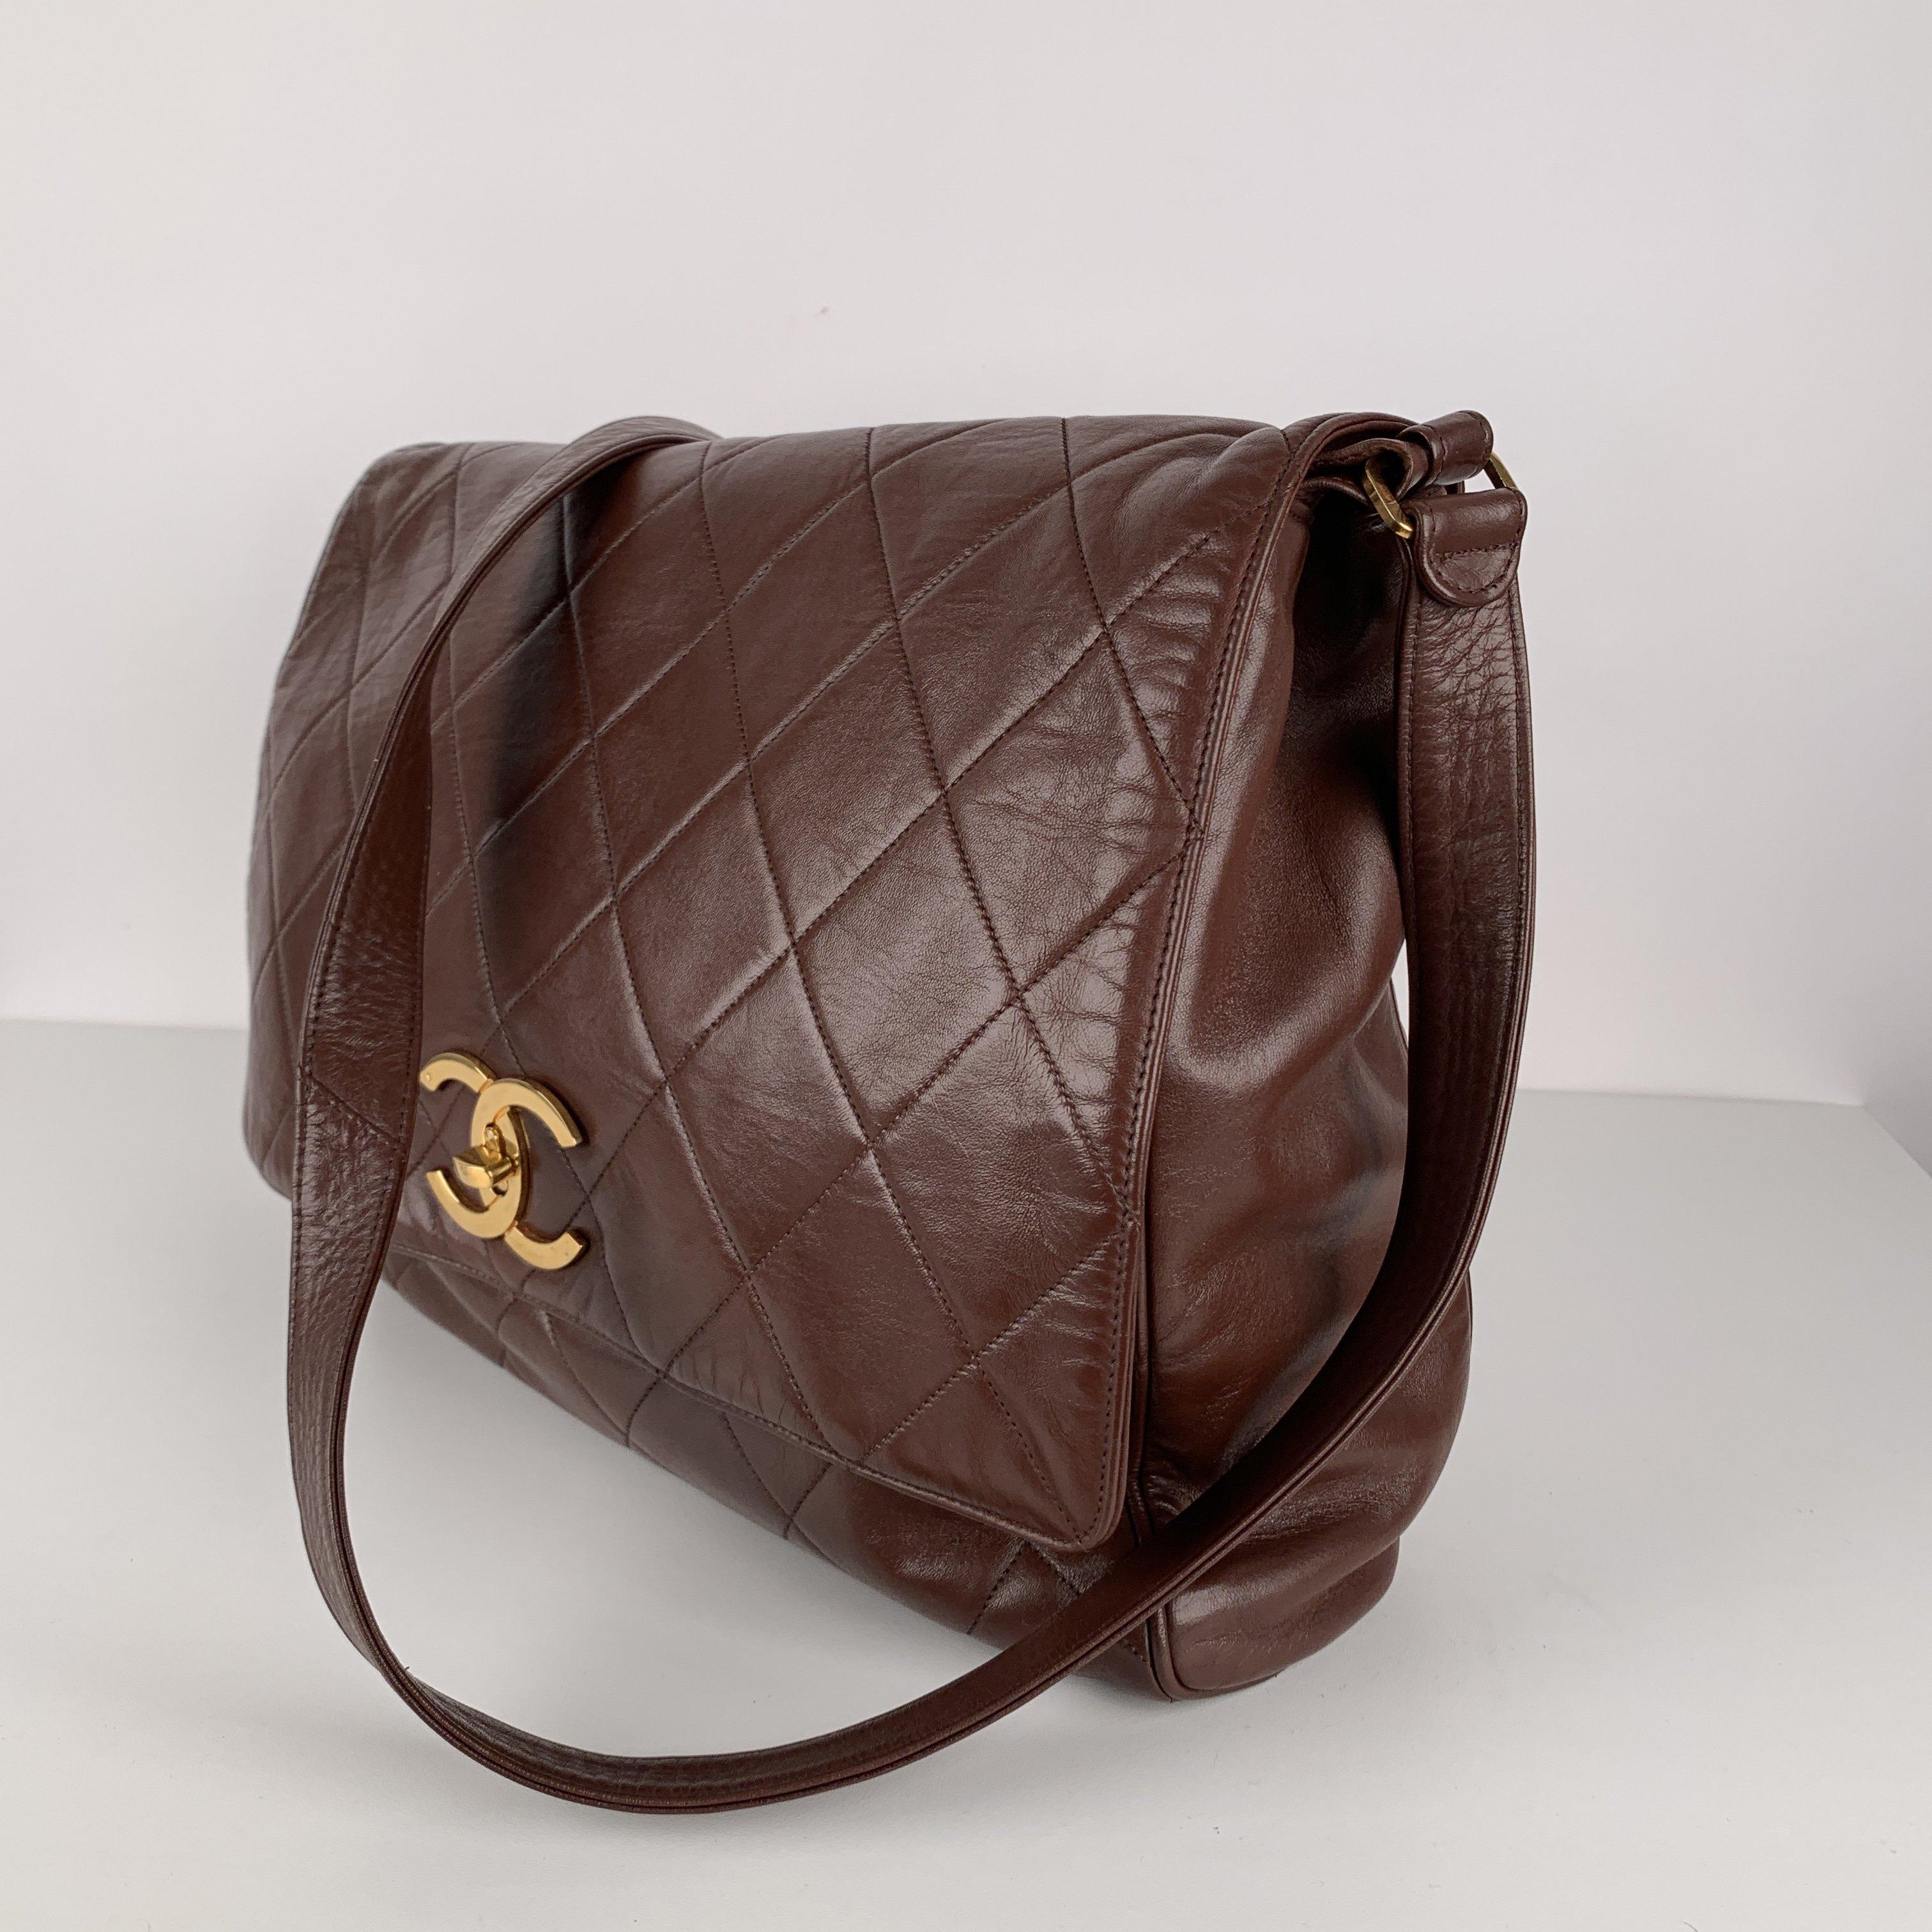 Women's Chanel Vintage Brown Quilted Leather Large Messenger Bag